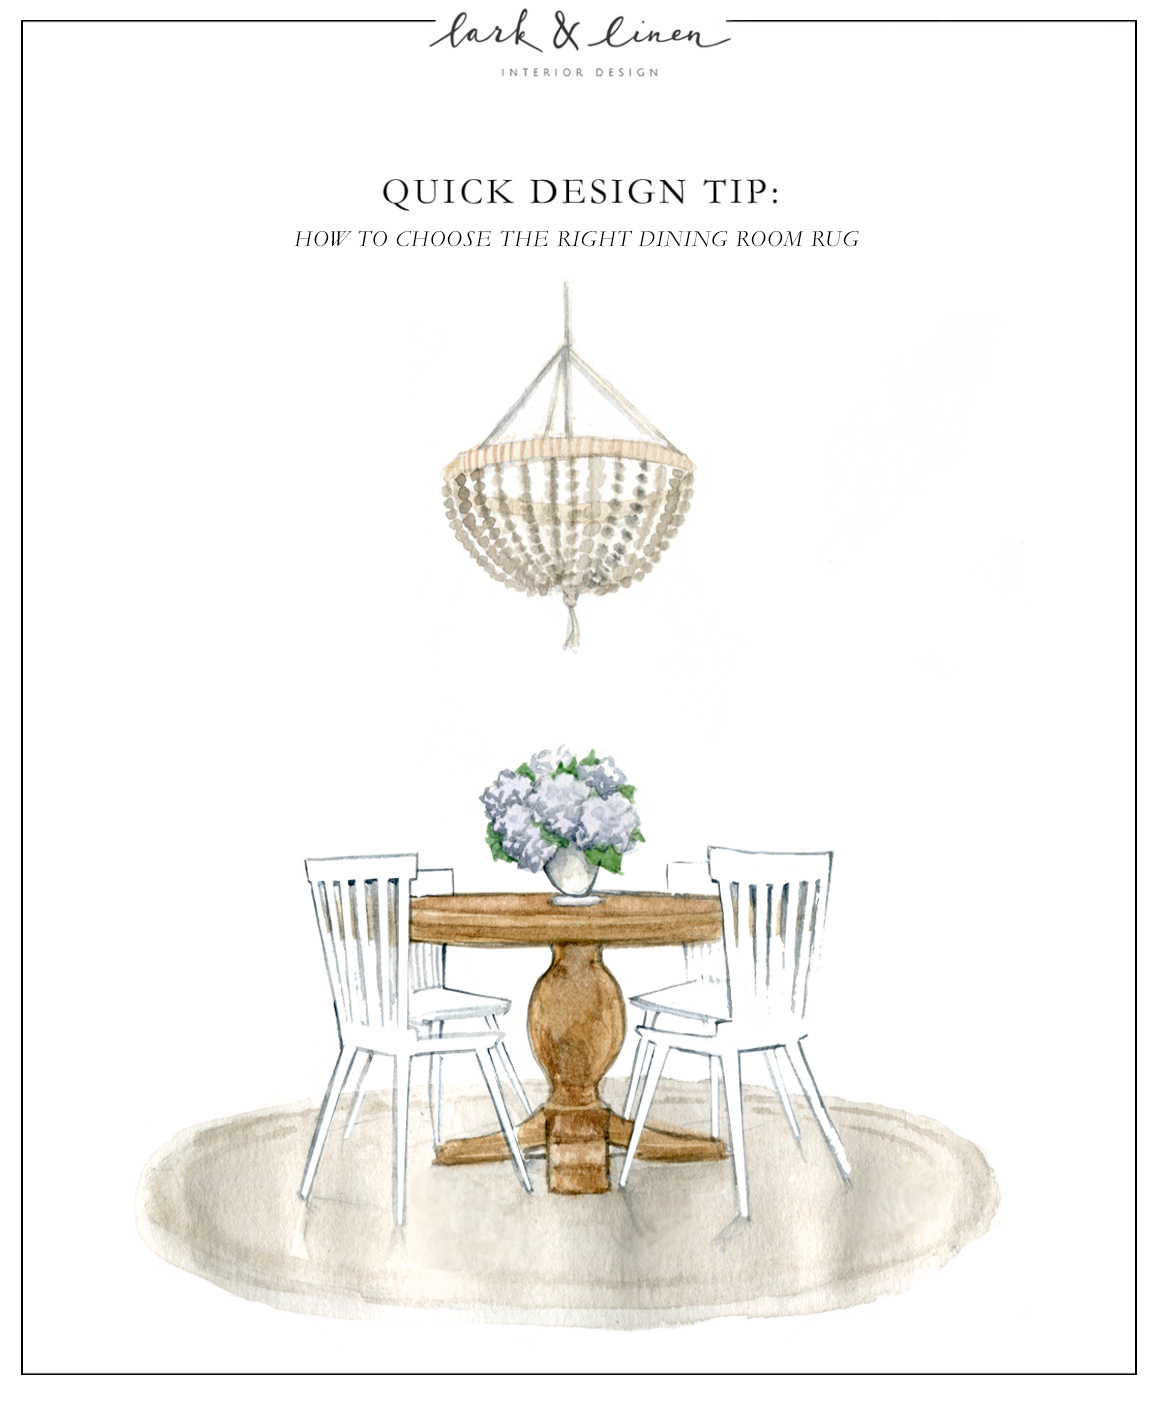 Quick Design Tip: How To Choose the Right Dining Room Rug | lark & linen